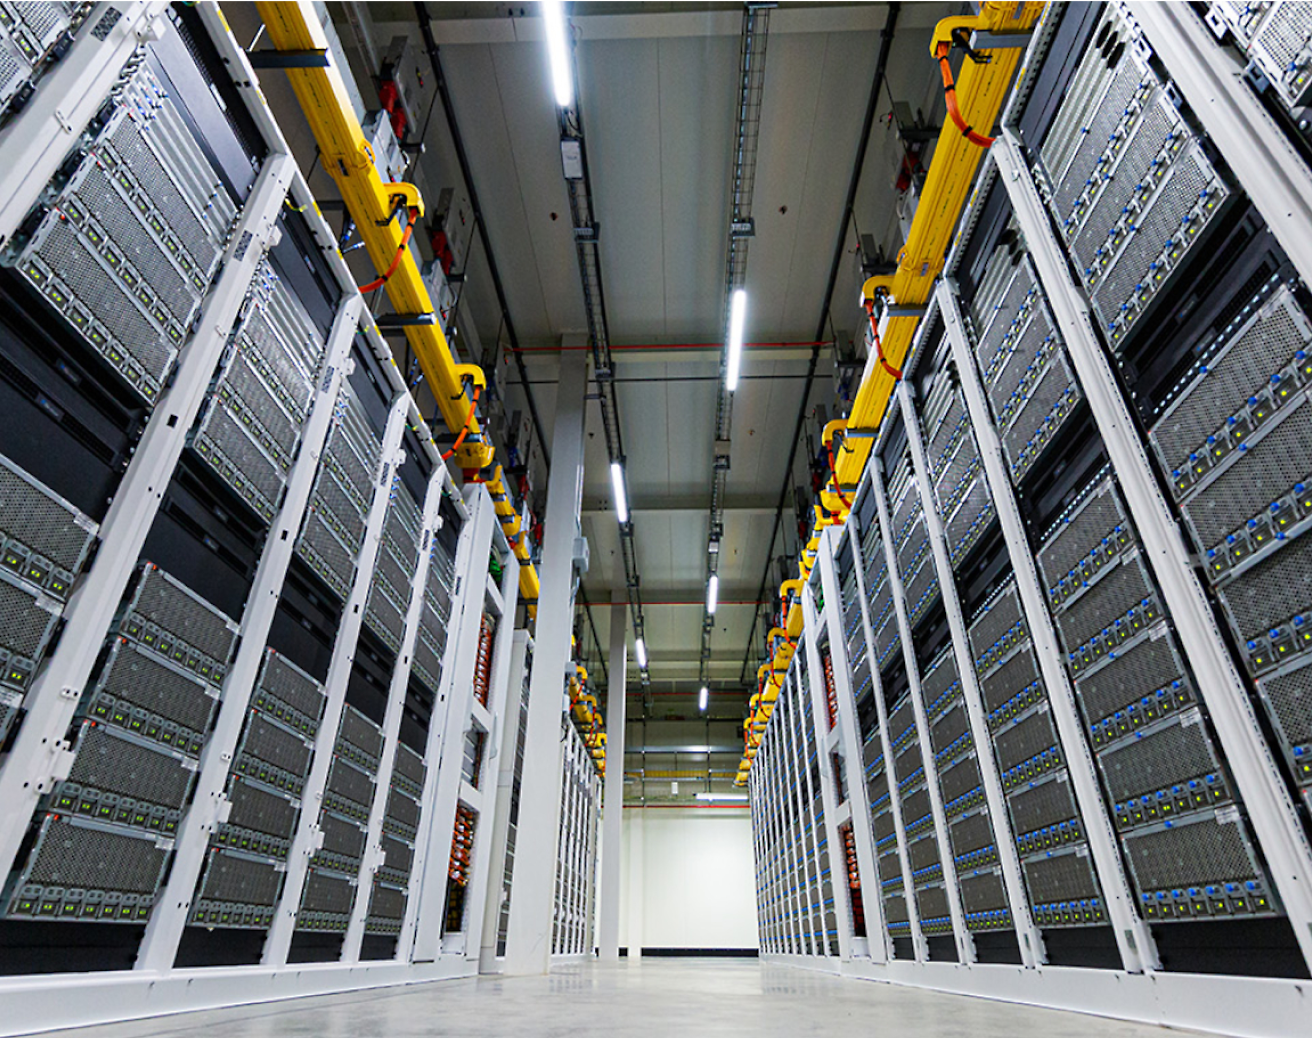 Aisle between rows of tall, modern server racks in a data center with cable trays overhead.